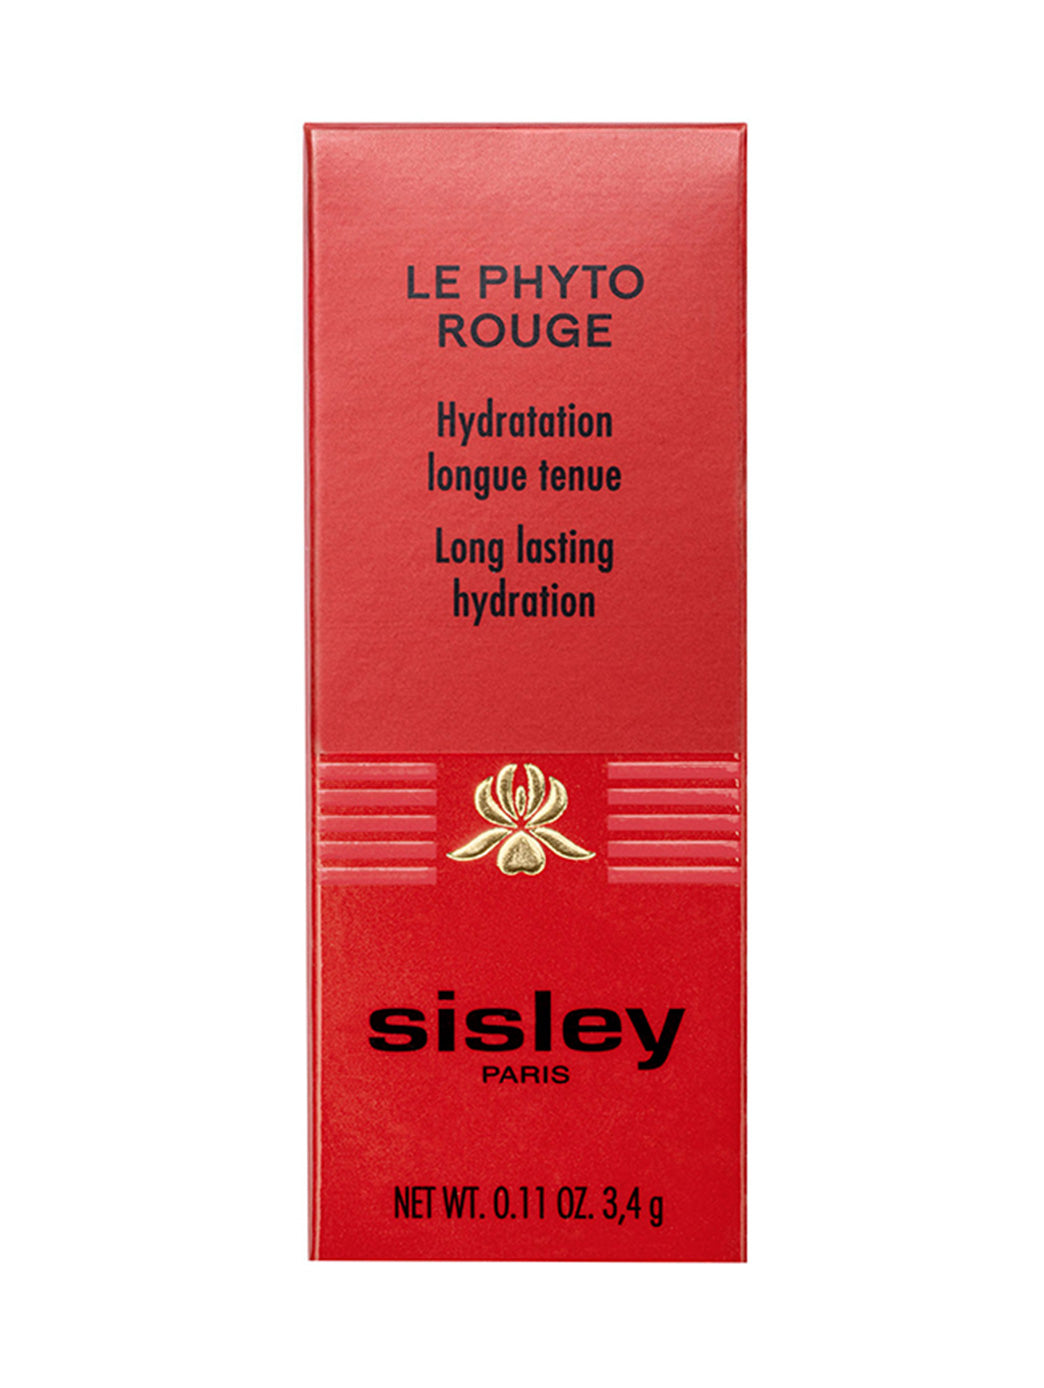 42472945647766 - Le Phyto Rouge